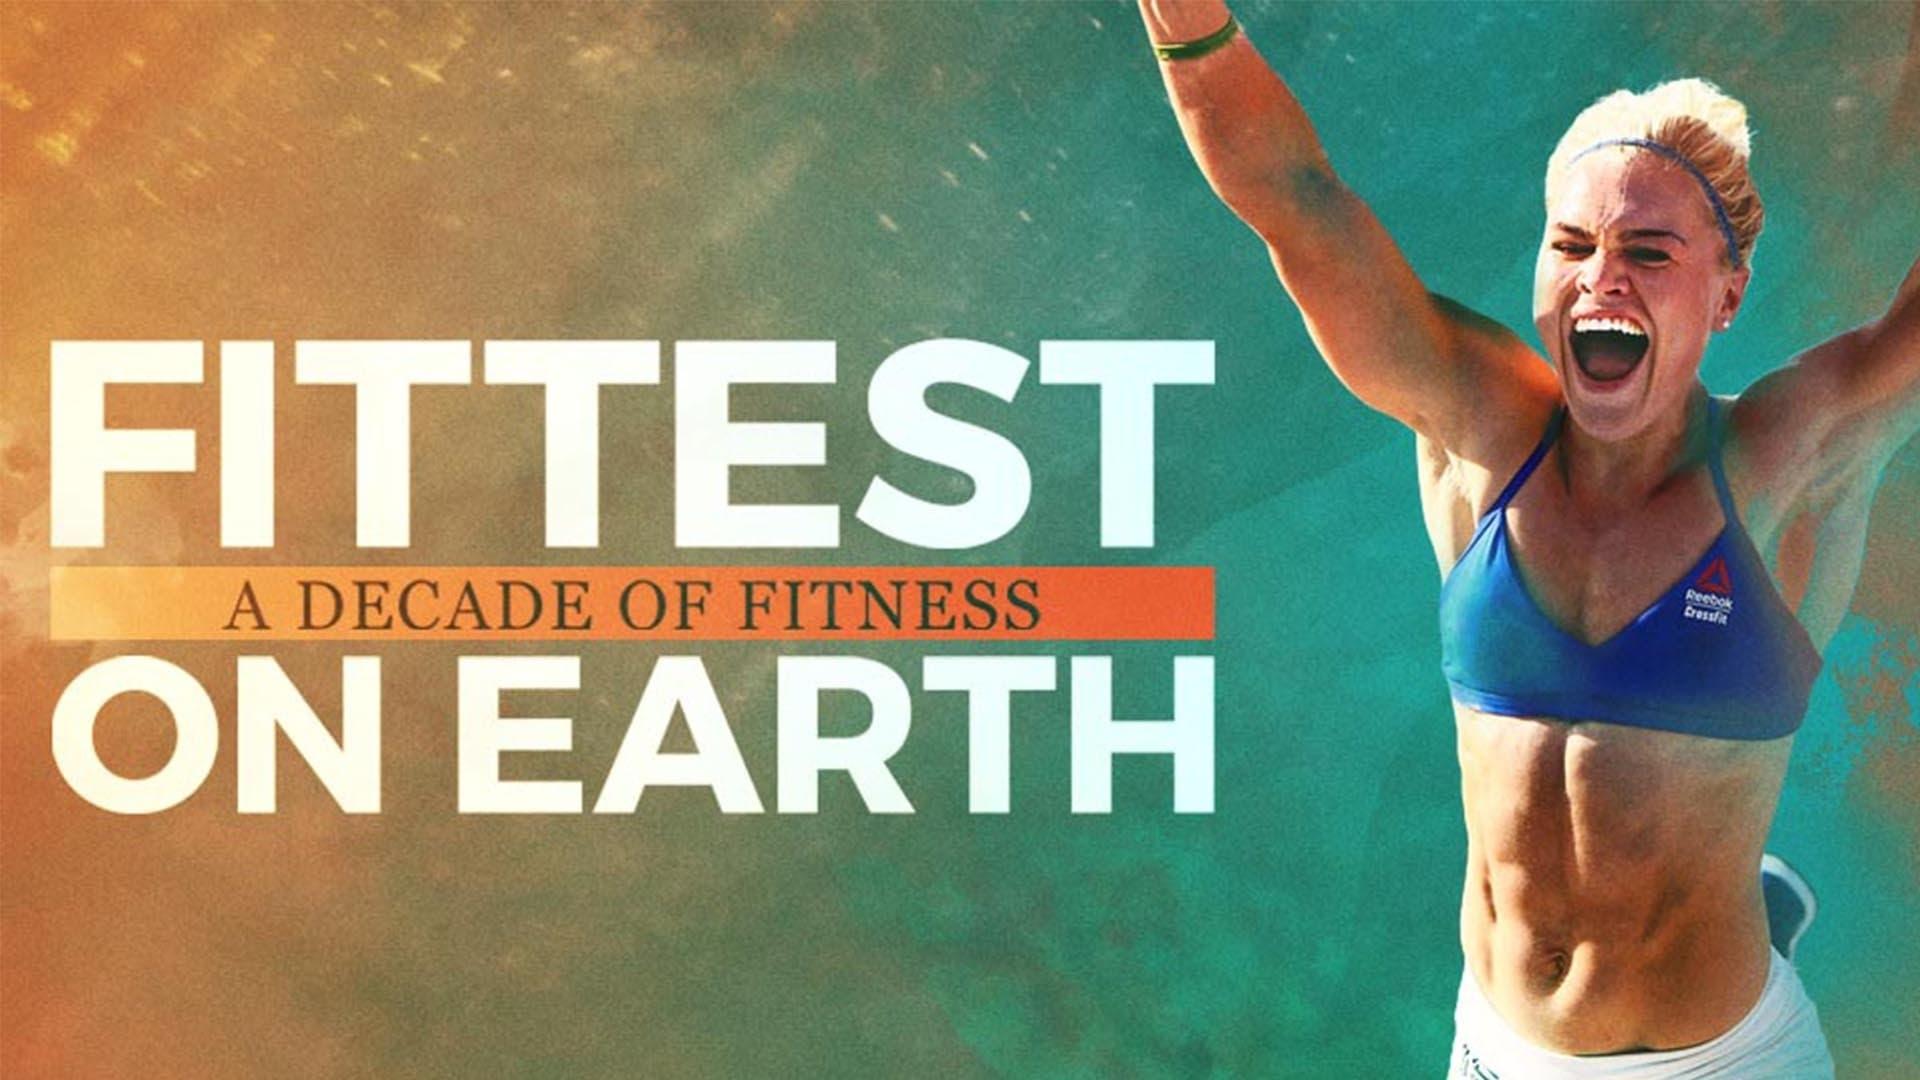 Fittest on Earth: A Decade of Fitness backdrop